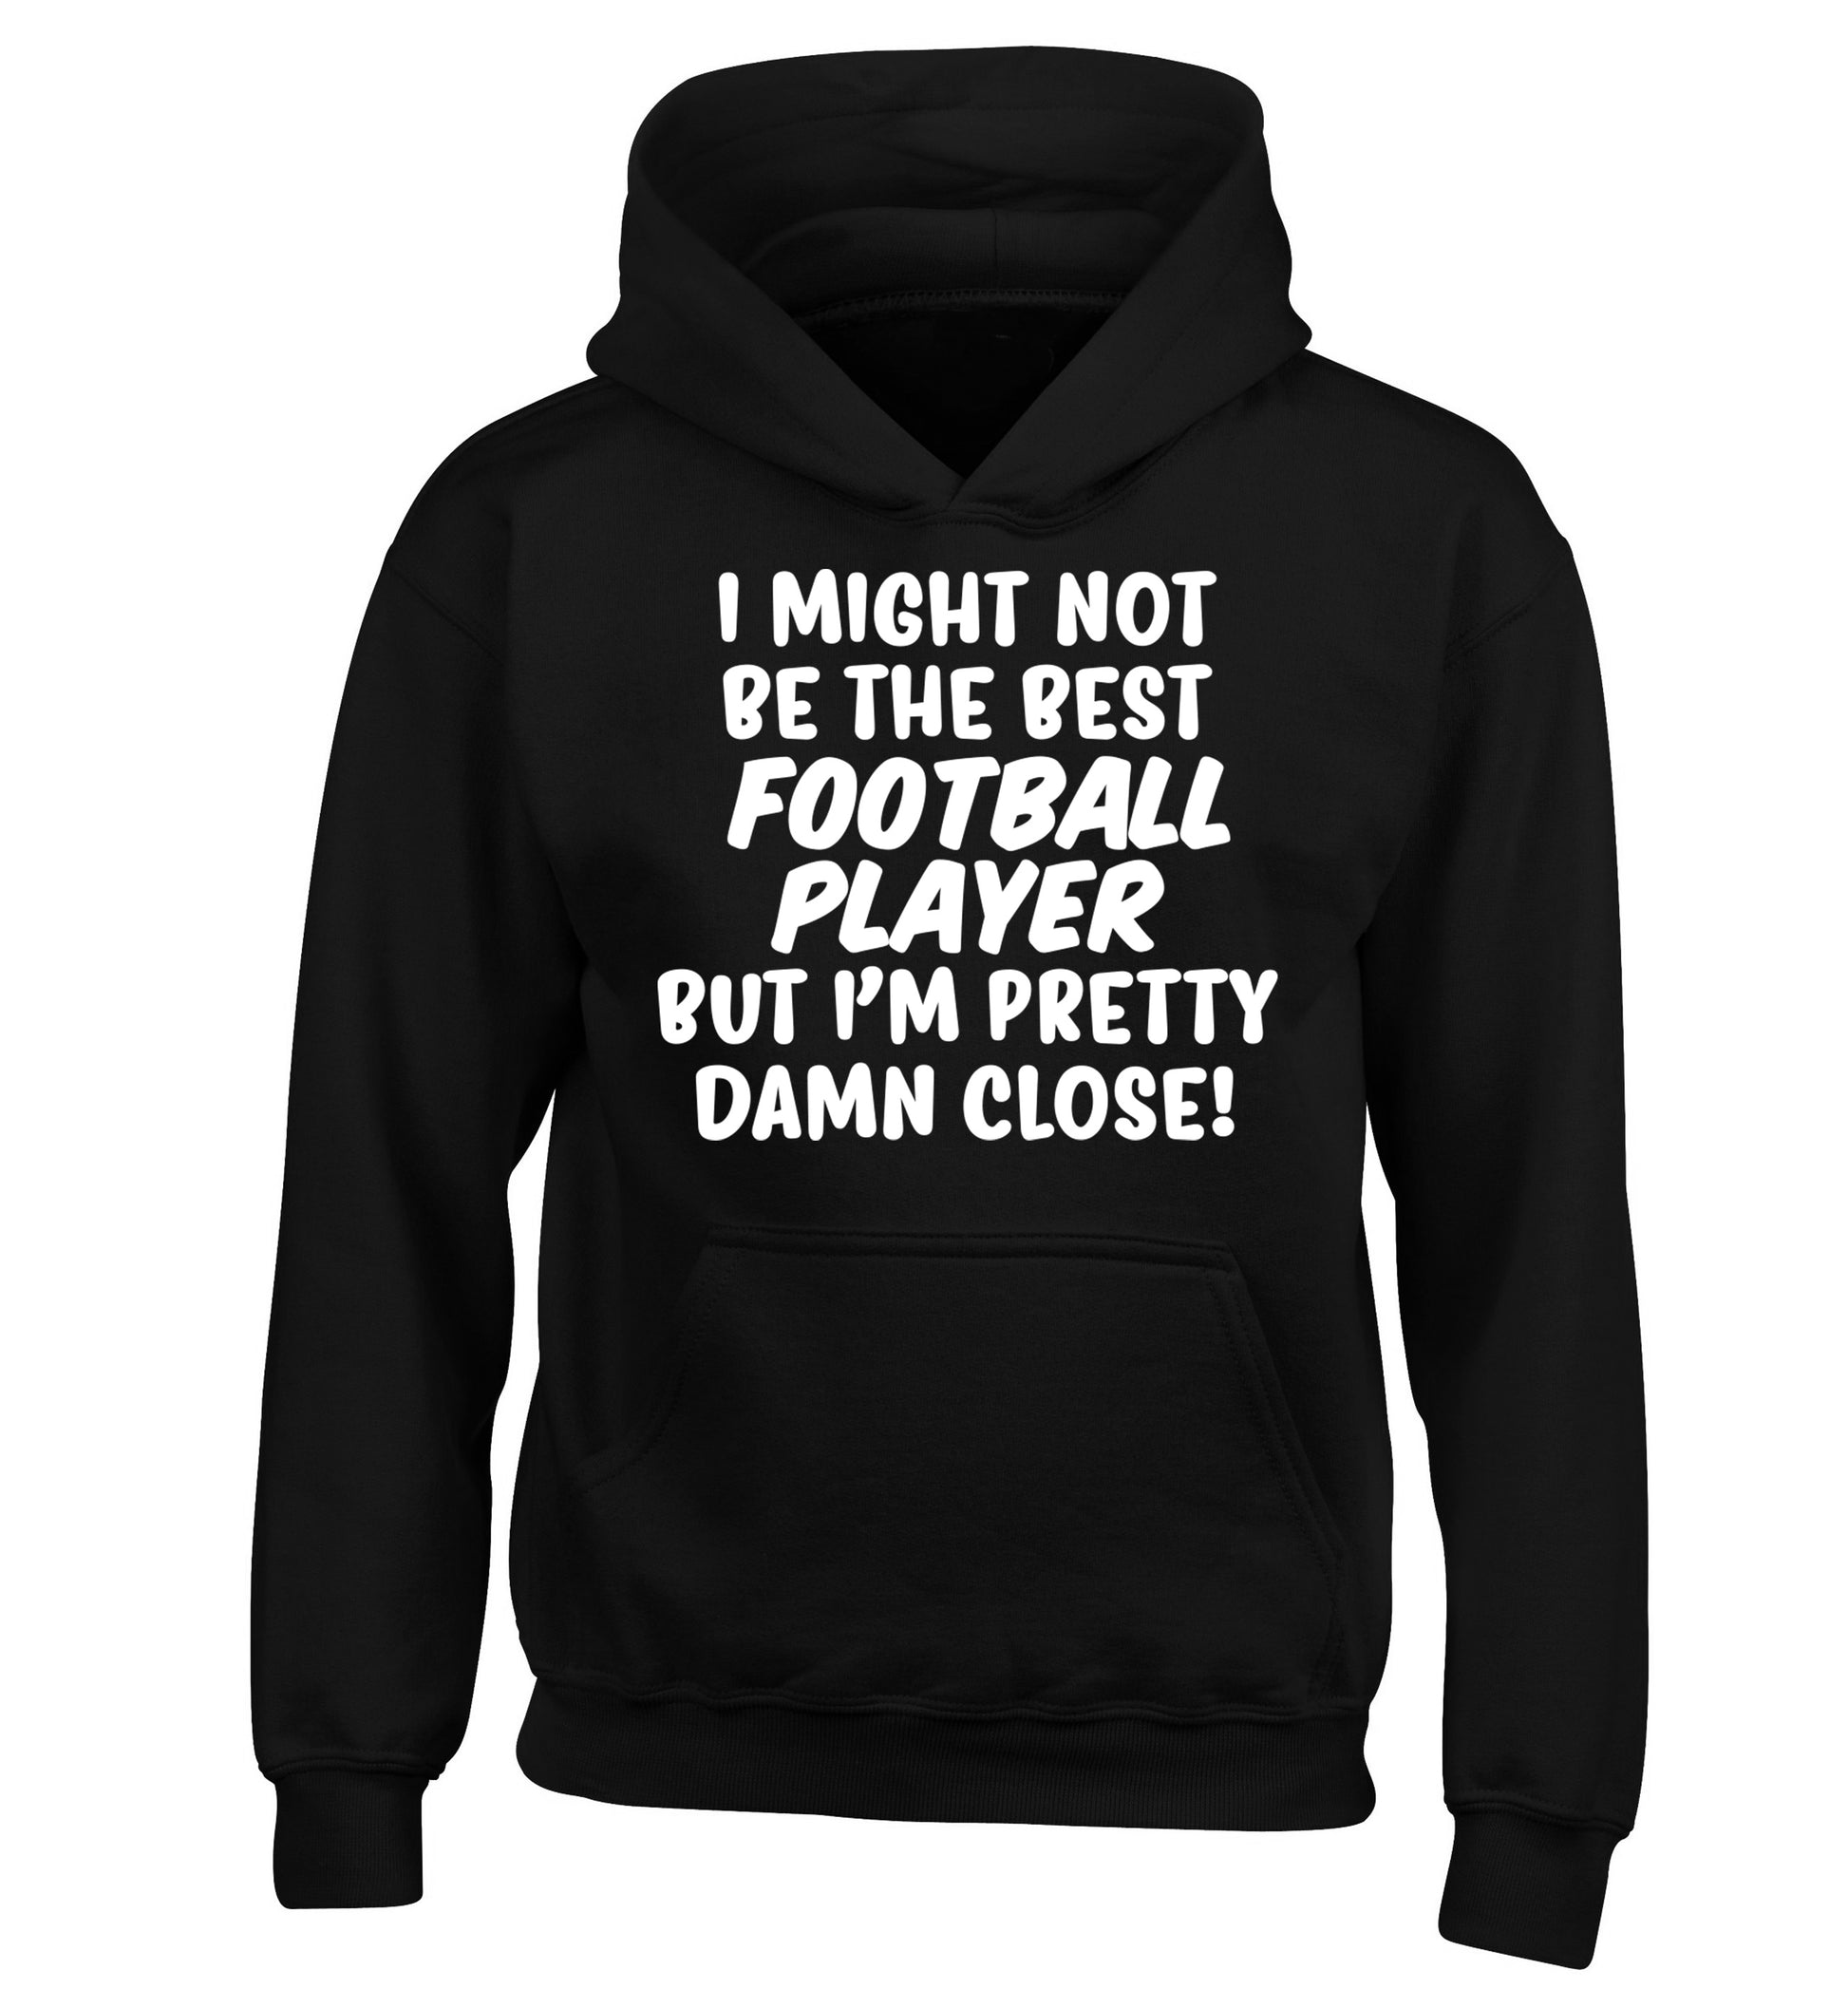 I might not be the best football player but I'm pretty close! children's black hoodie 12-14 Years